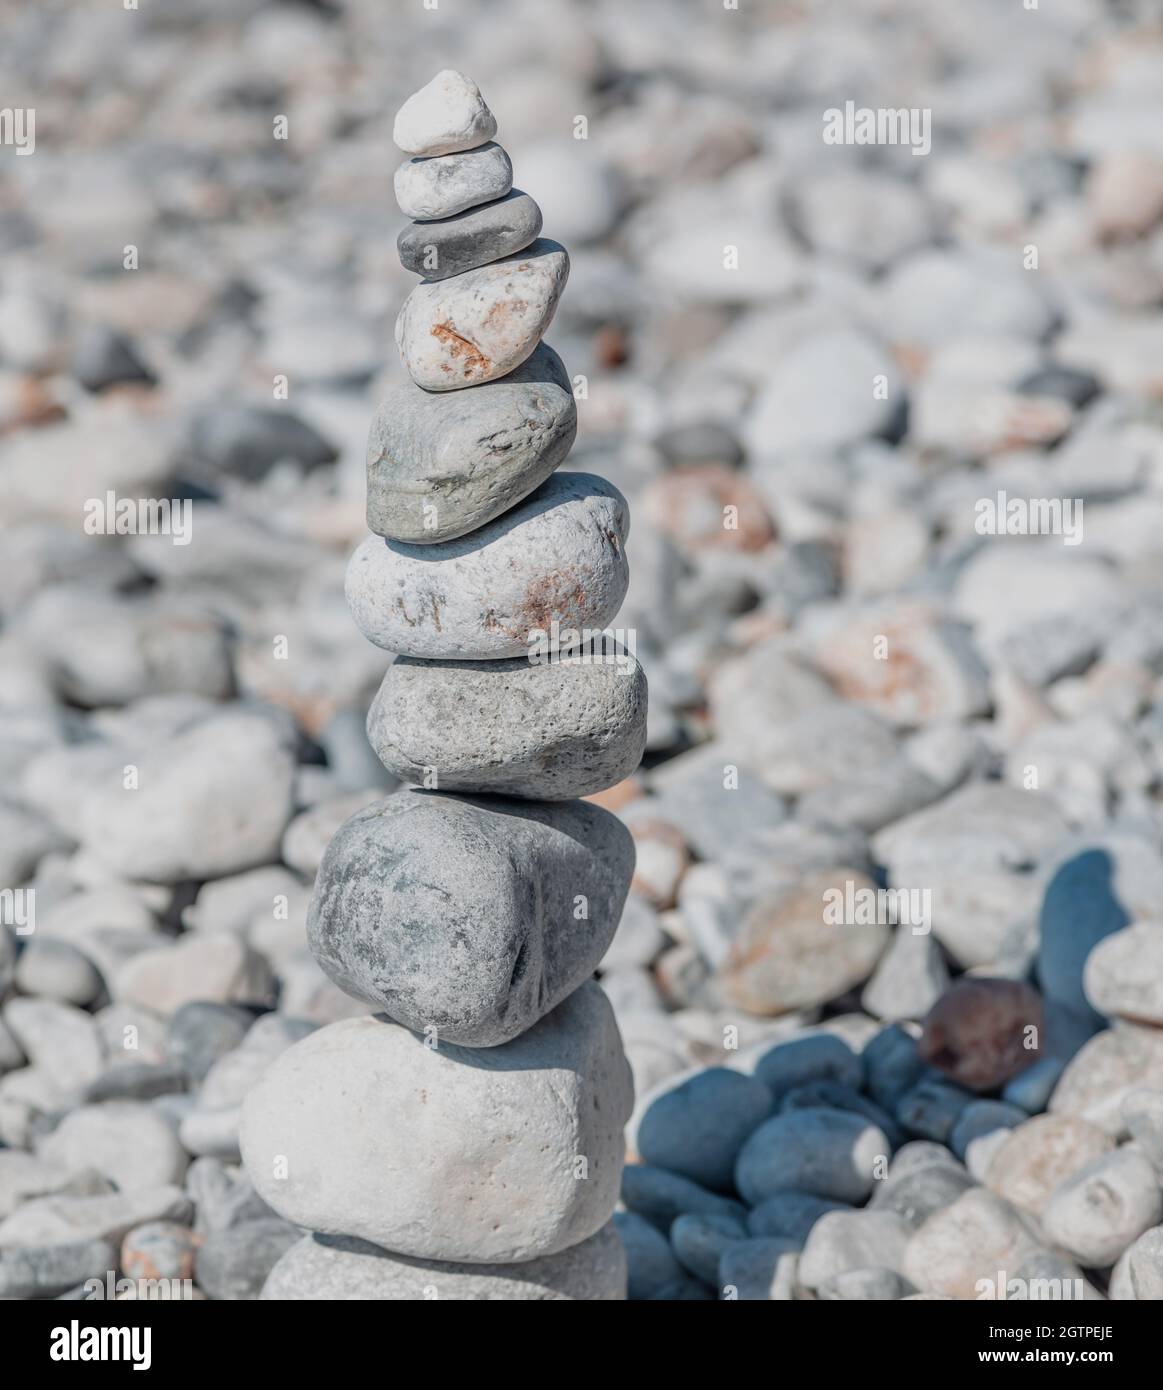 Zen stones, smooth rock tower stacked on pebble beach background, sunny day. Balance, harmony and peace concept. Feng shui, yoga, natural therapy Stock Photo